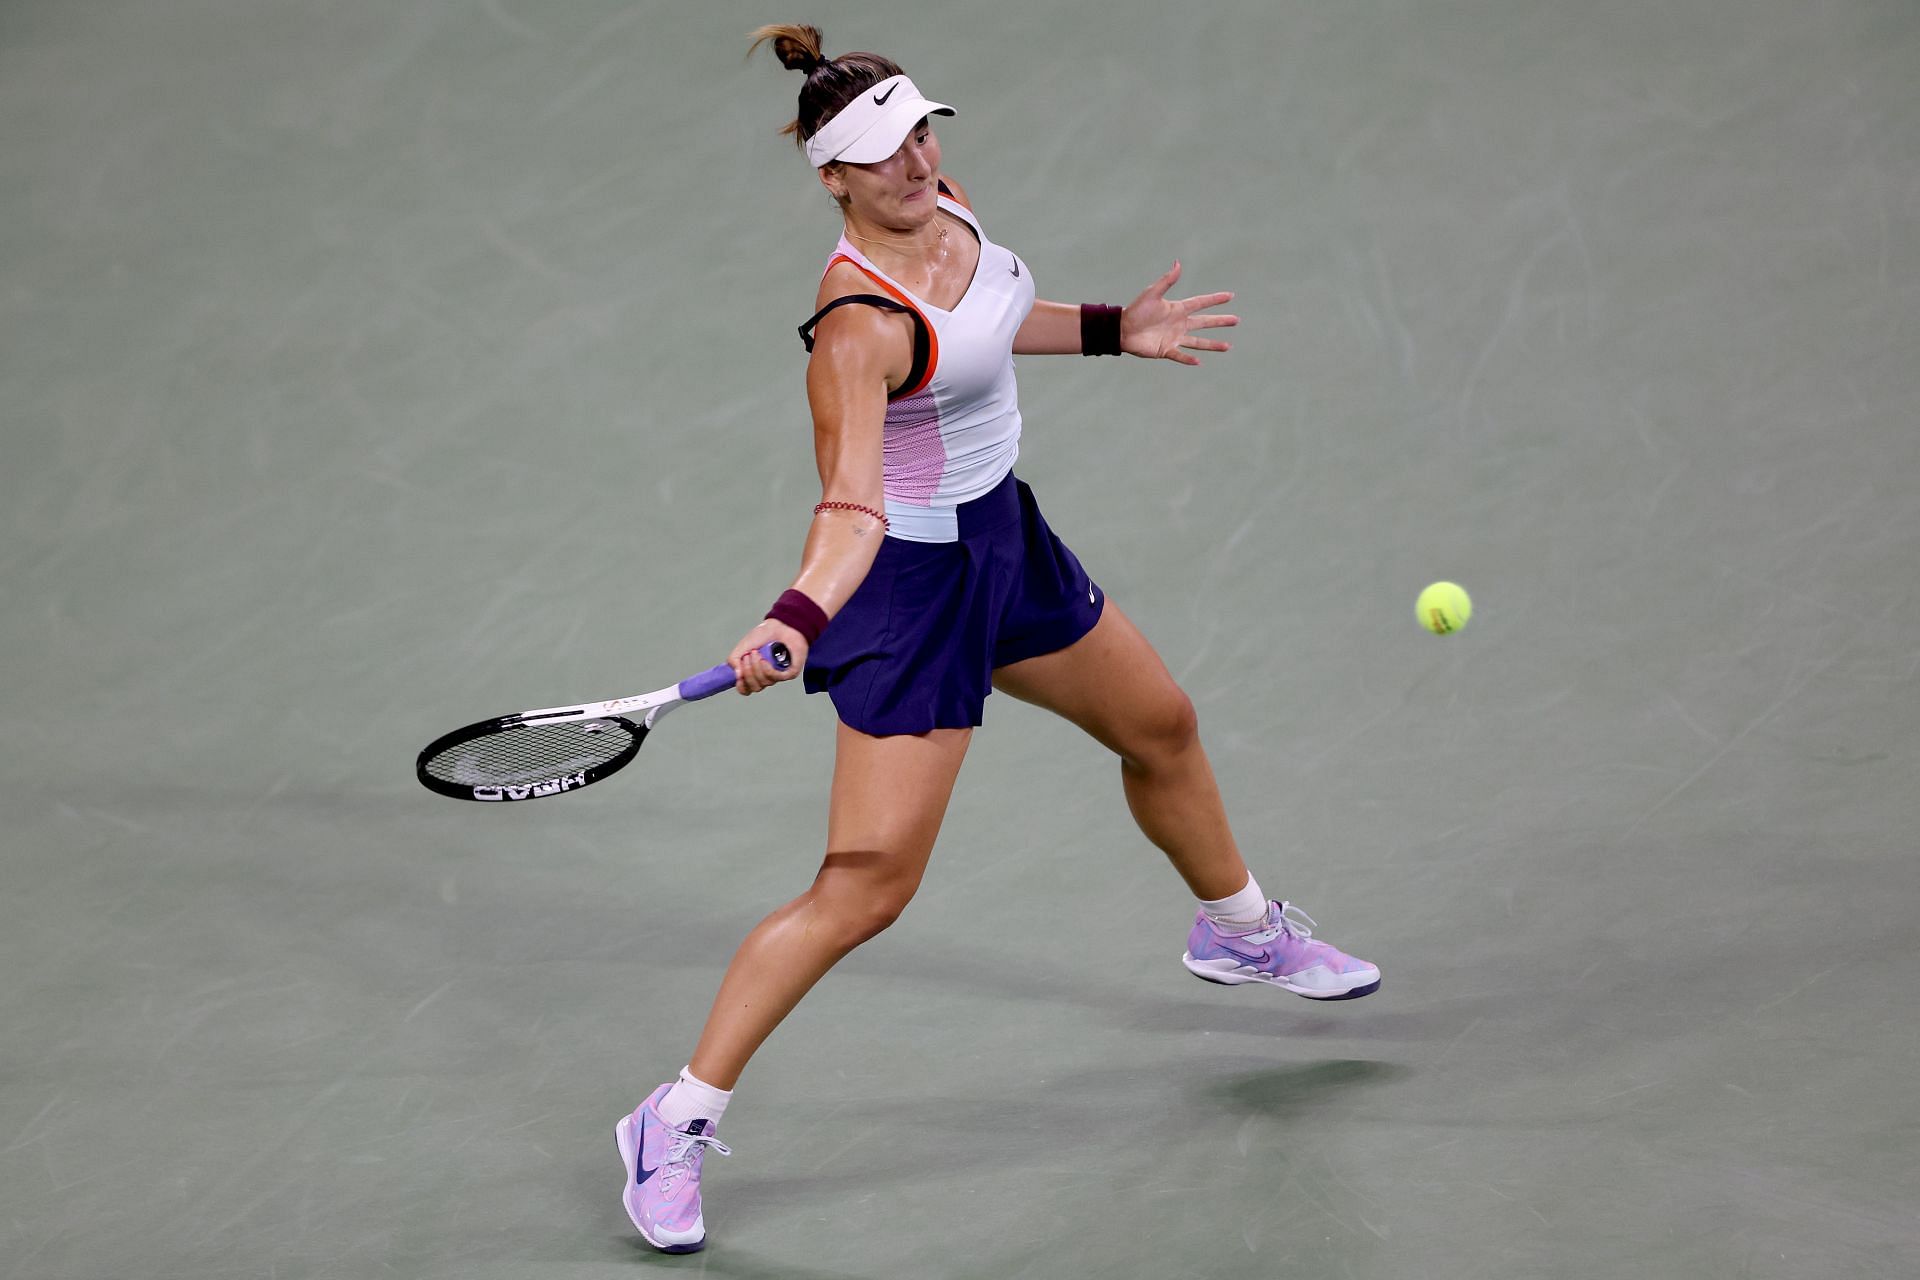 Andreescu in action at the US Open